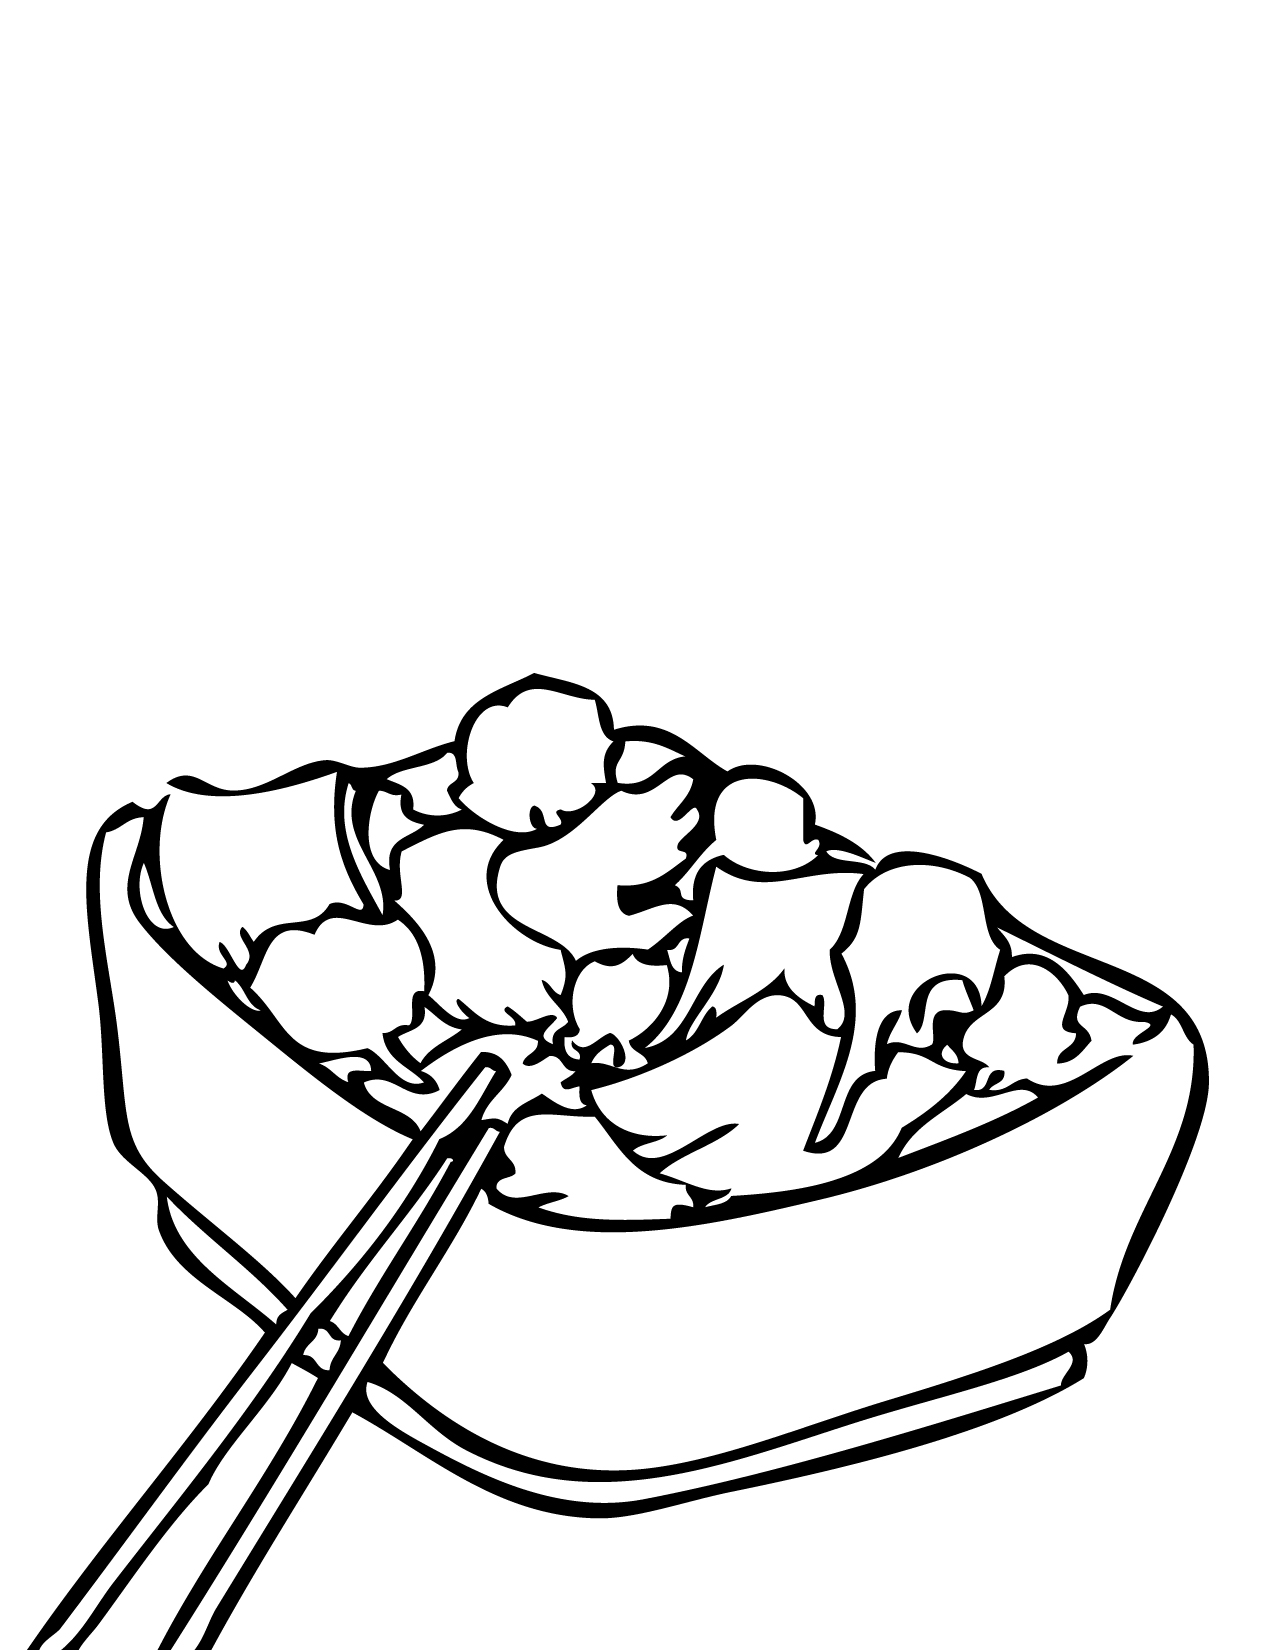 Chinese food healthy food coloring pages free clipart images